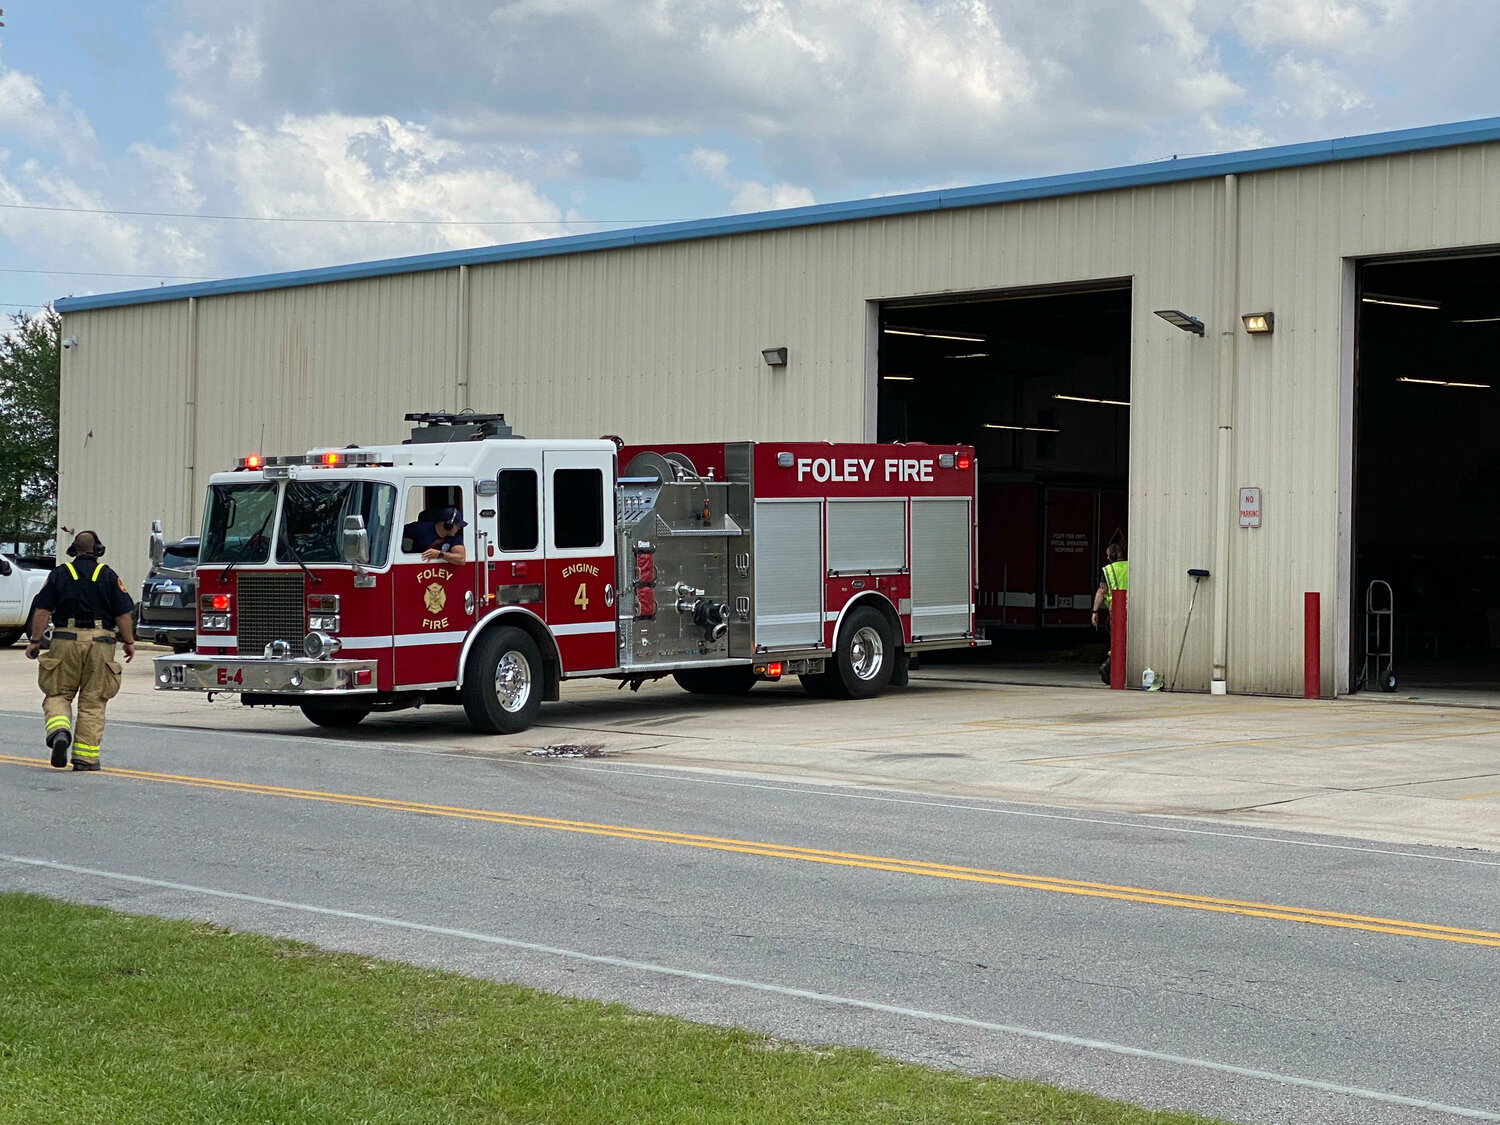 The main Foley Fire Station will become one of 10 sites around Alabama where babies who cannot be cared for can be dropped off anonymously under a program passed by the Alabama Legislature earlier this year.